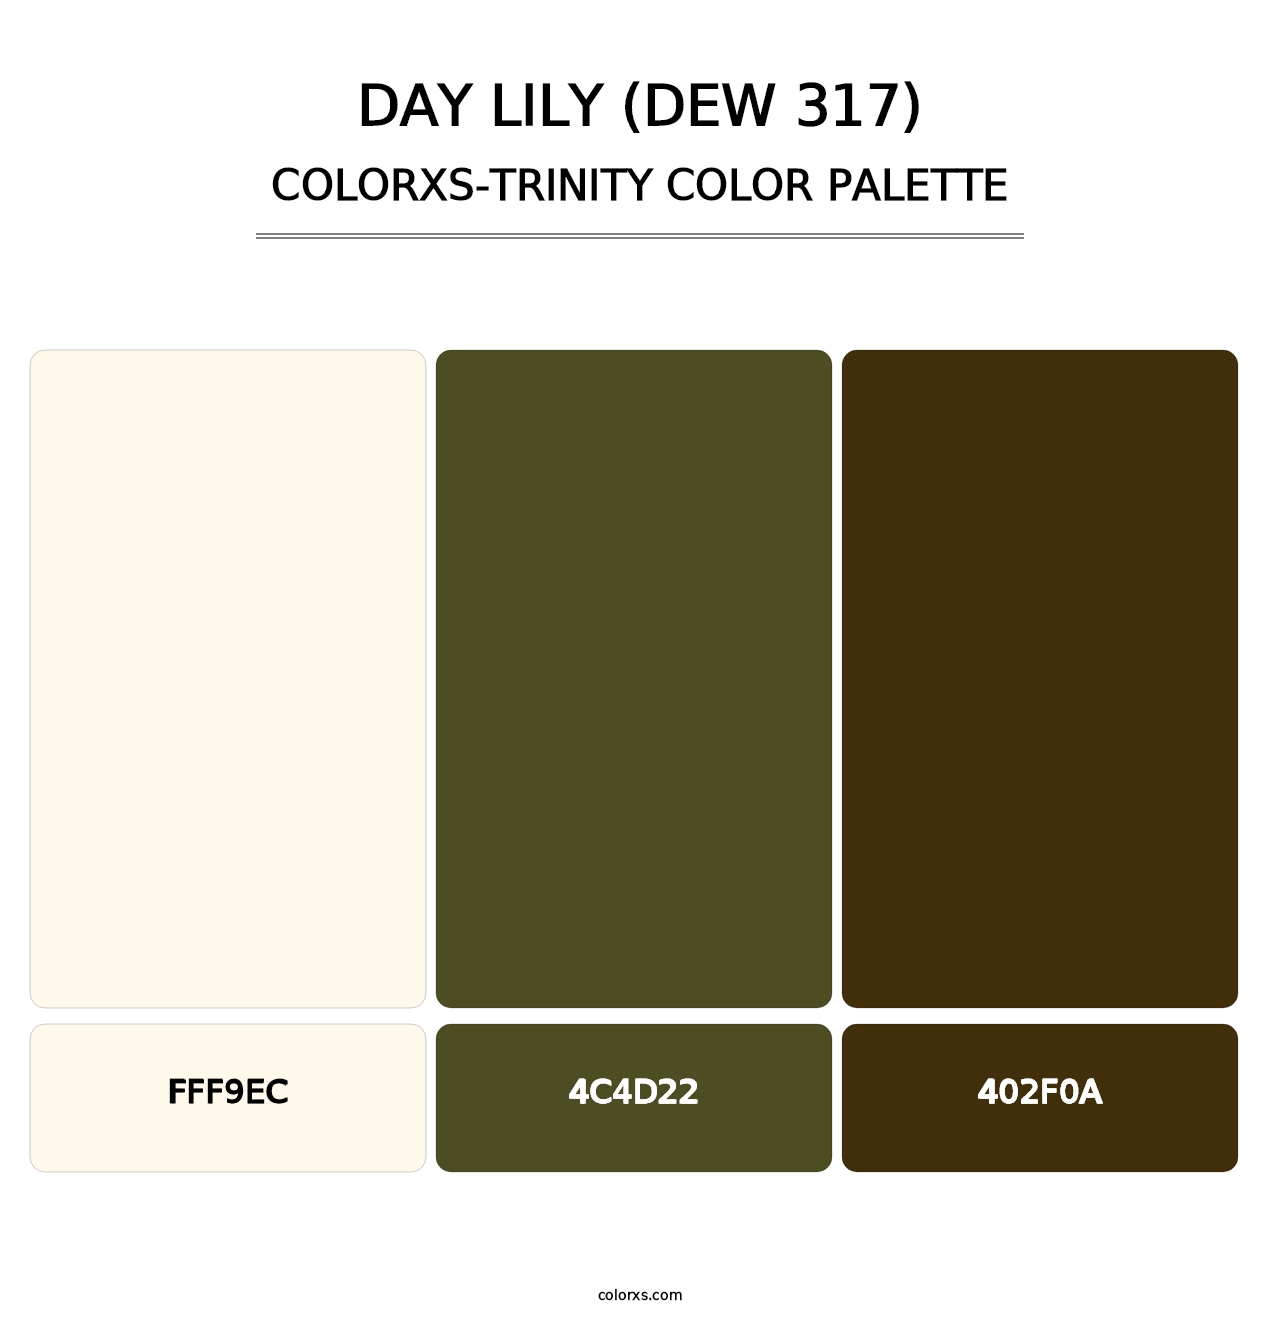 Day Lily (DEW 317) - Colorxs Trinity Palette